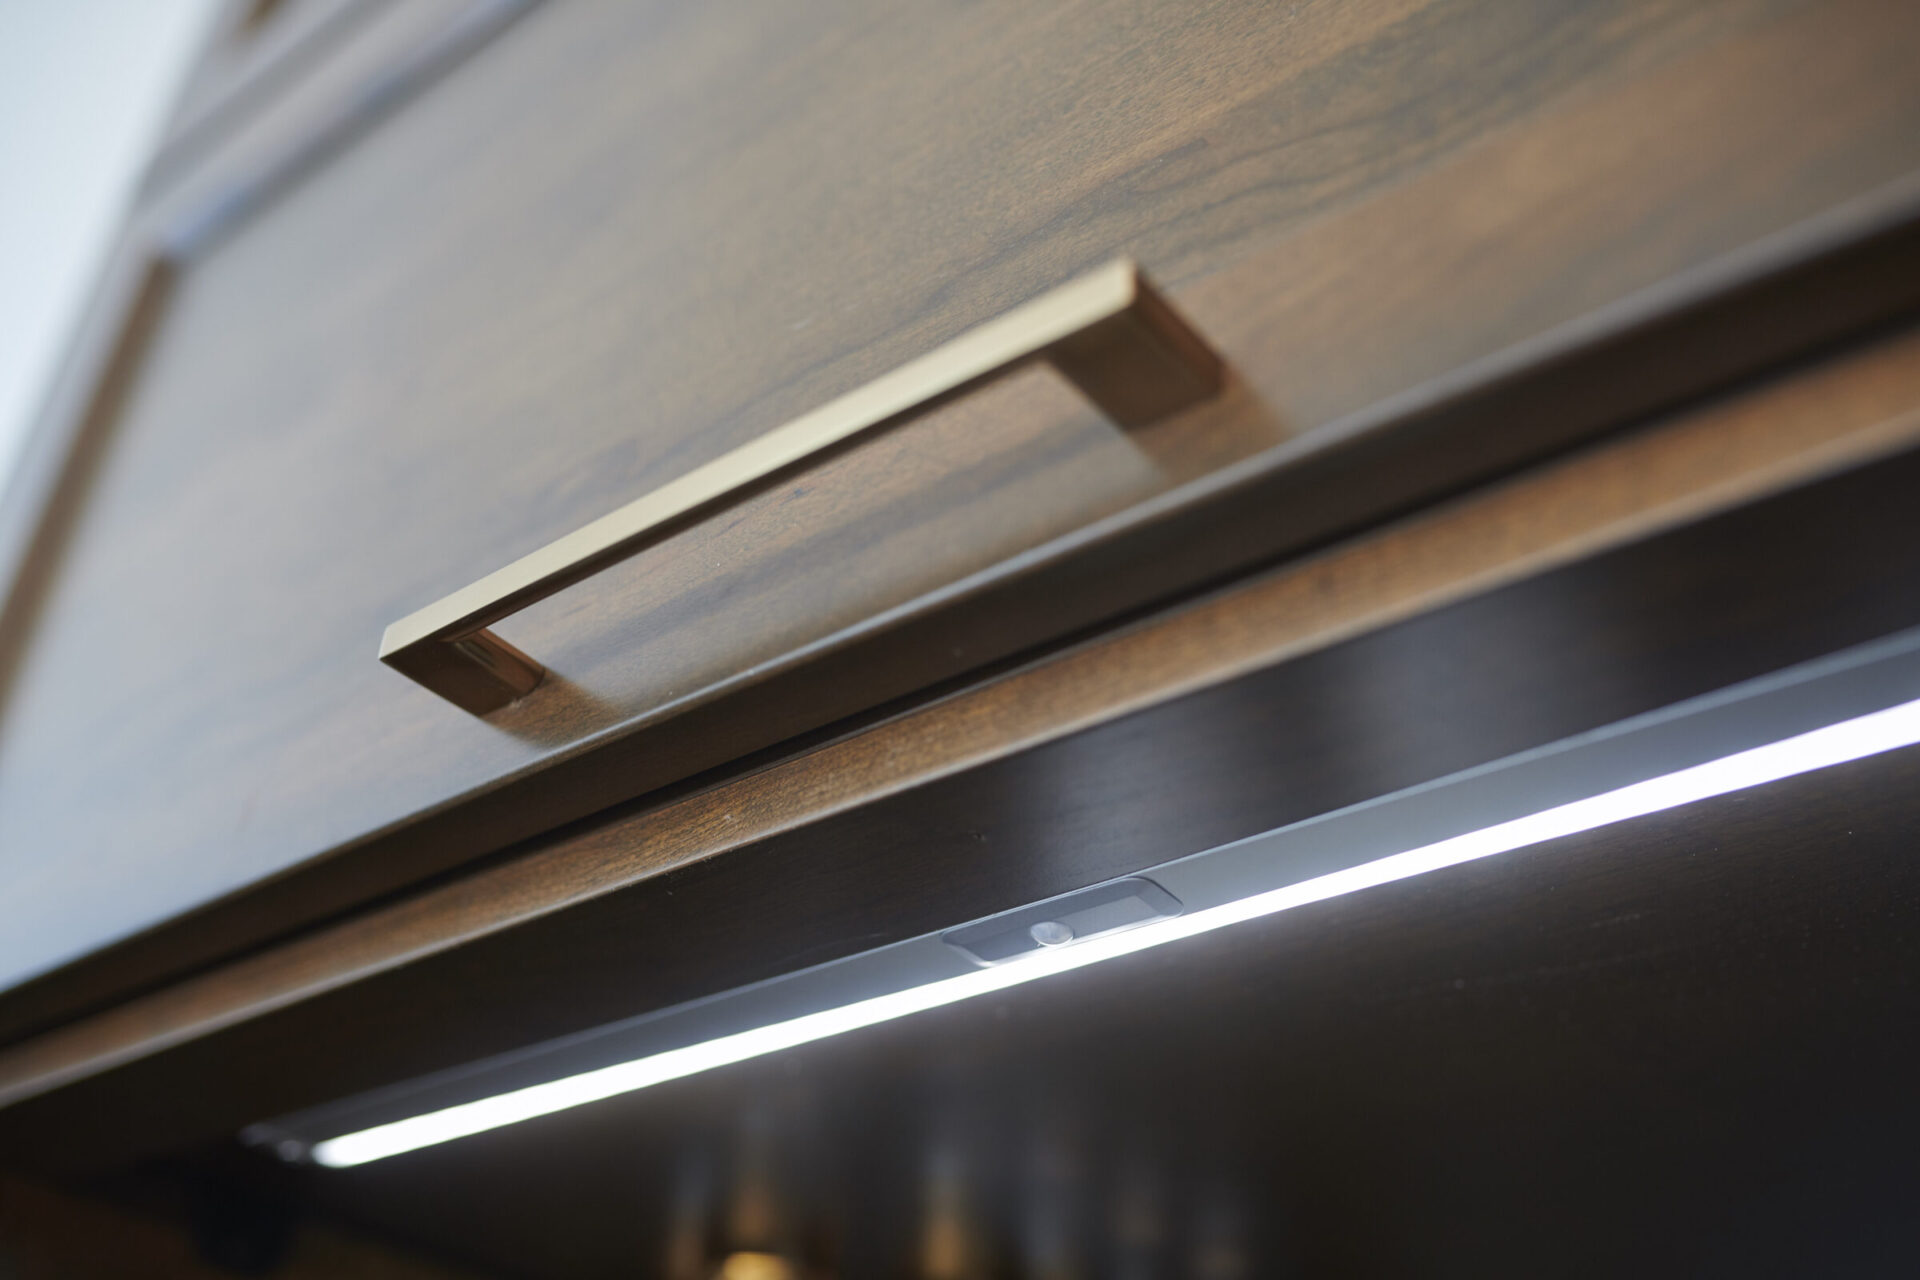 A close-up perspective of a wooden cabinet with a metallic handle, featuring under-cabinet lighting illuminating the countertop beneath with a soft glow.